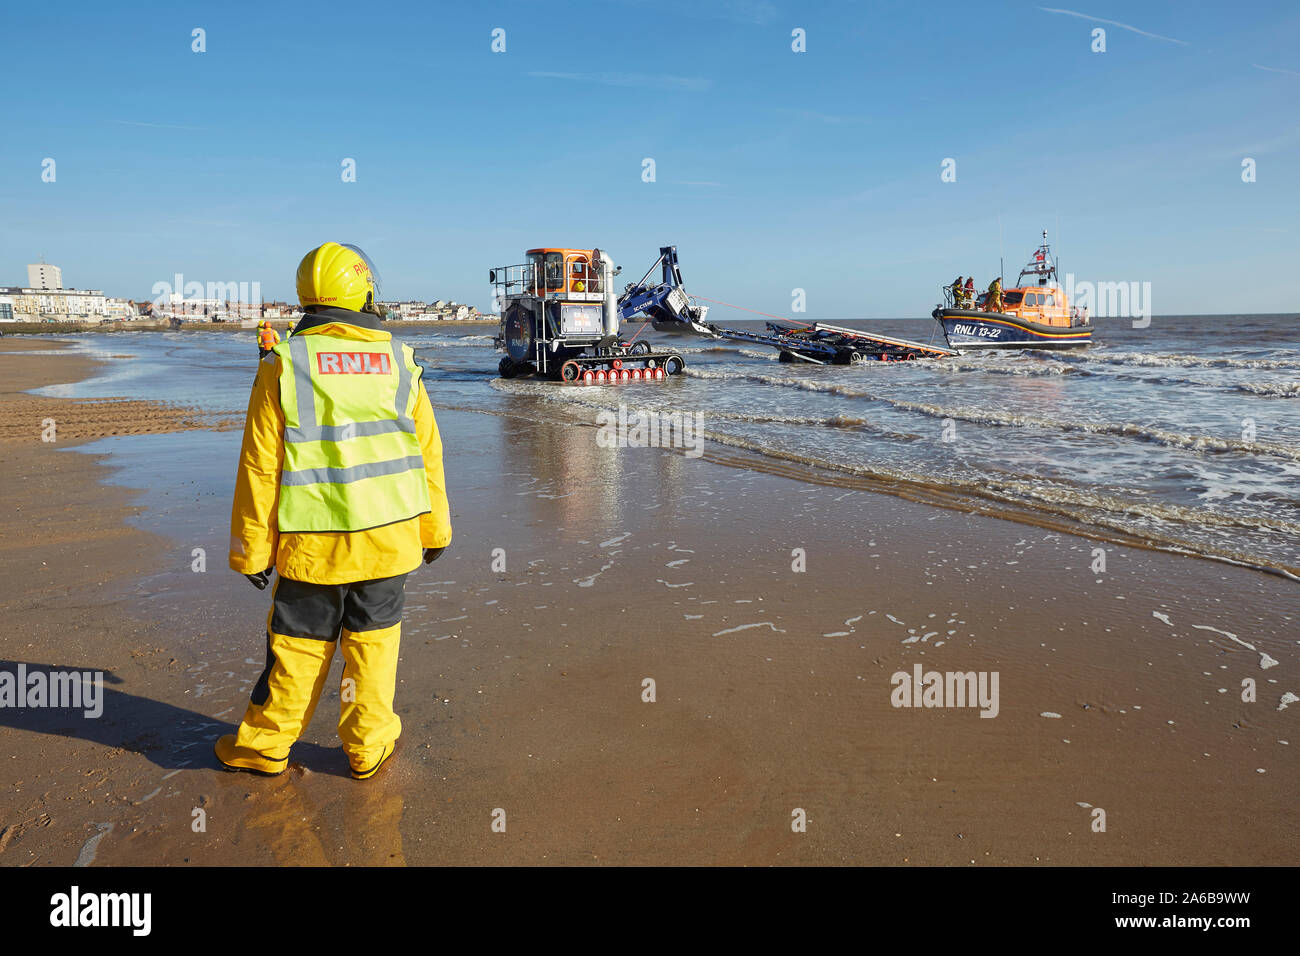 RNLI lifeboat 13-22 launching on Bridlington's south beach, East Yorkshire, UK, with the help of volunteer marine engineers. Stock Photo